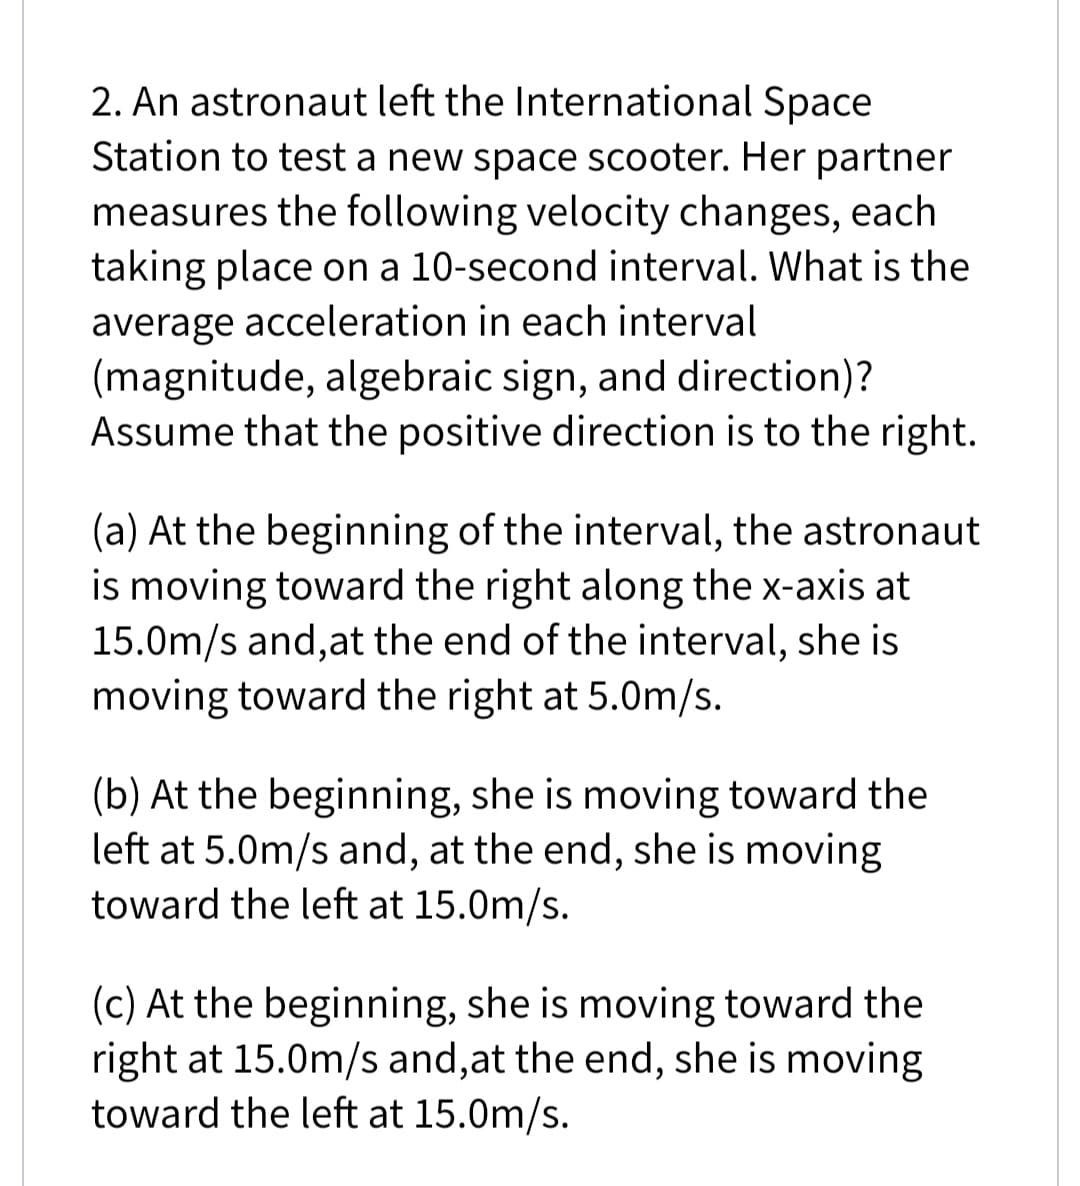 2. An astronaut left the International Space
Station to test a new space scooter. Her partner
measures the following velocity changes, each
taking place on a 10-second interval. What is the
average acceleration in each interval
(magnitude, algebraic sign, and direction)?
Assume that the positive direction is to the right.
(a) At the beginning of the interval, the astronaut
is moving toward the right along the x-axis at
15.0m/s and,at the end of the interval, she is
moving toward the right at 5.0m/s.
(b) At the beginning, she is moving toward the
left at 5.0m/s and, at the end, she is moving
toward the left at 15.0m/s.
(c) At the beginning, she is moving toward the
right at 15.0m/s and,at the end, she is moving
toward the left at 15.0m/s.
